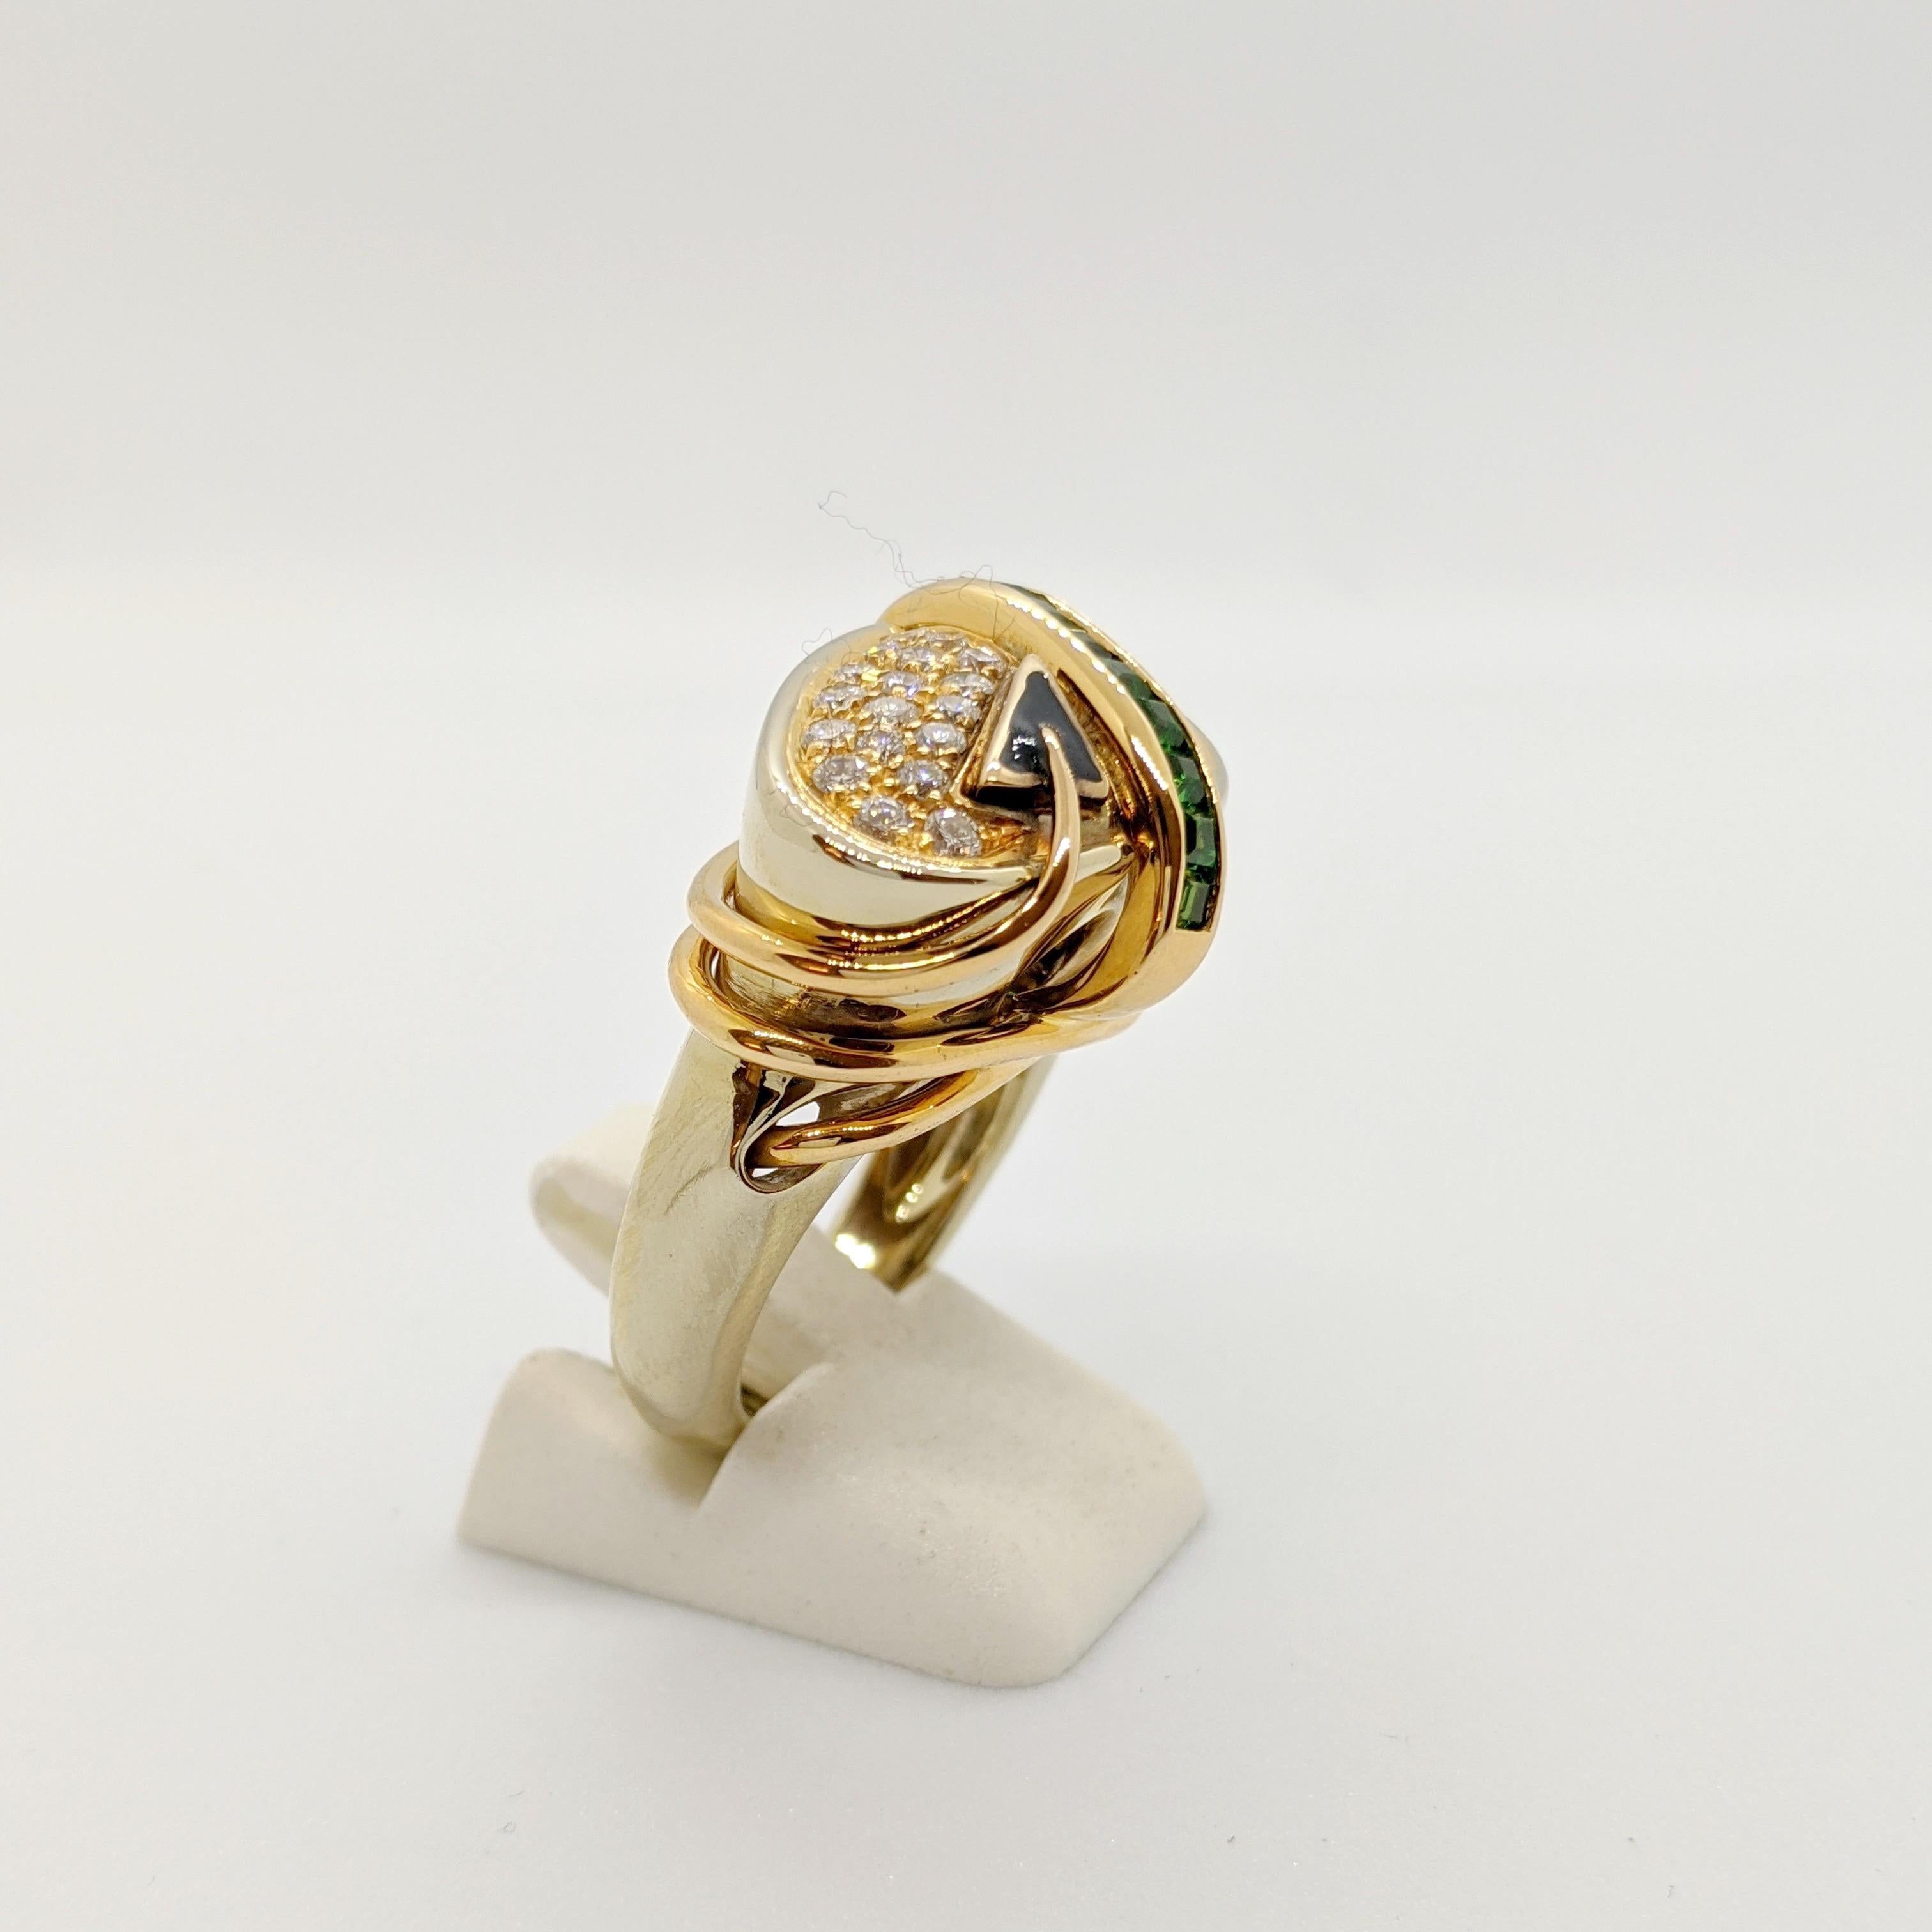 Round Cut La Nouvelle Bague 18 Karat Rose and White Gold Ring, with Diamonds and Tsavorite For Sale